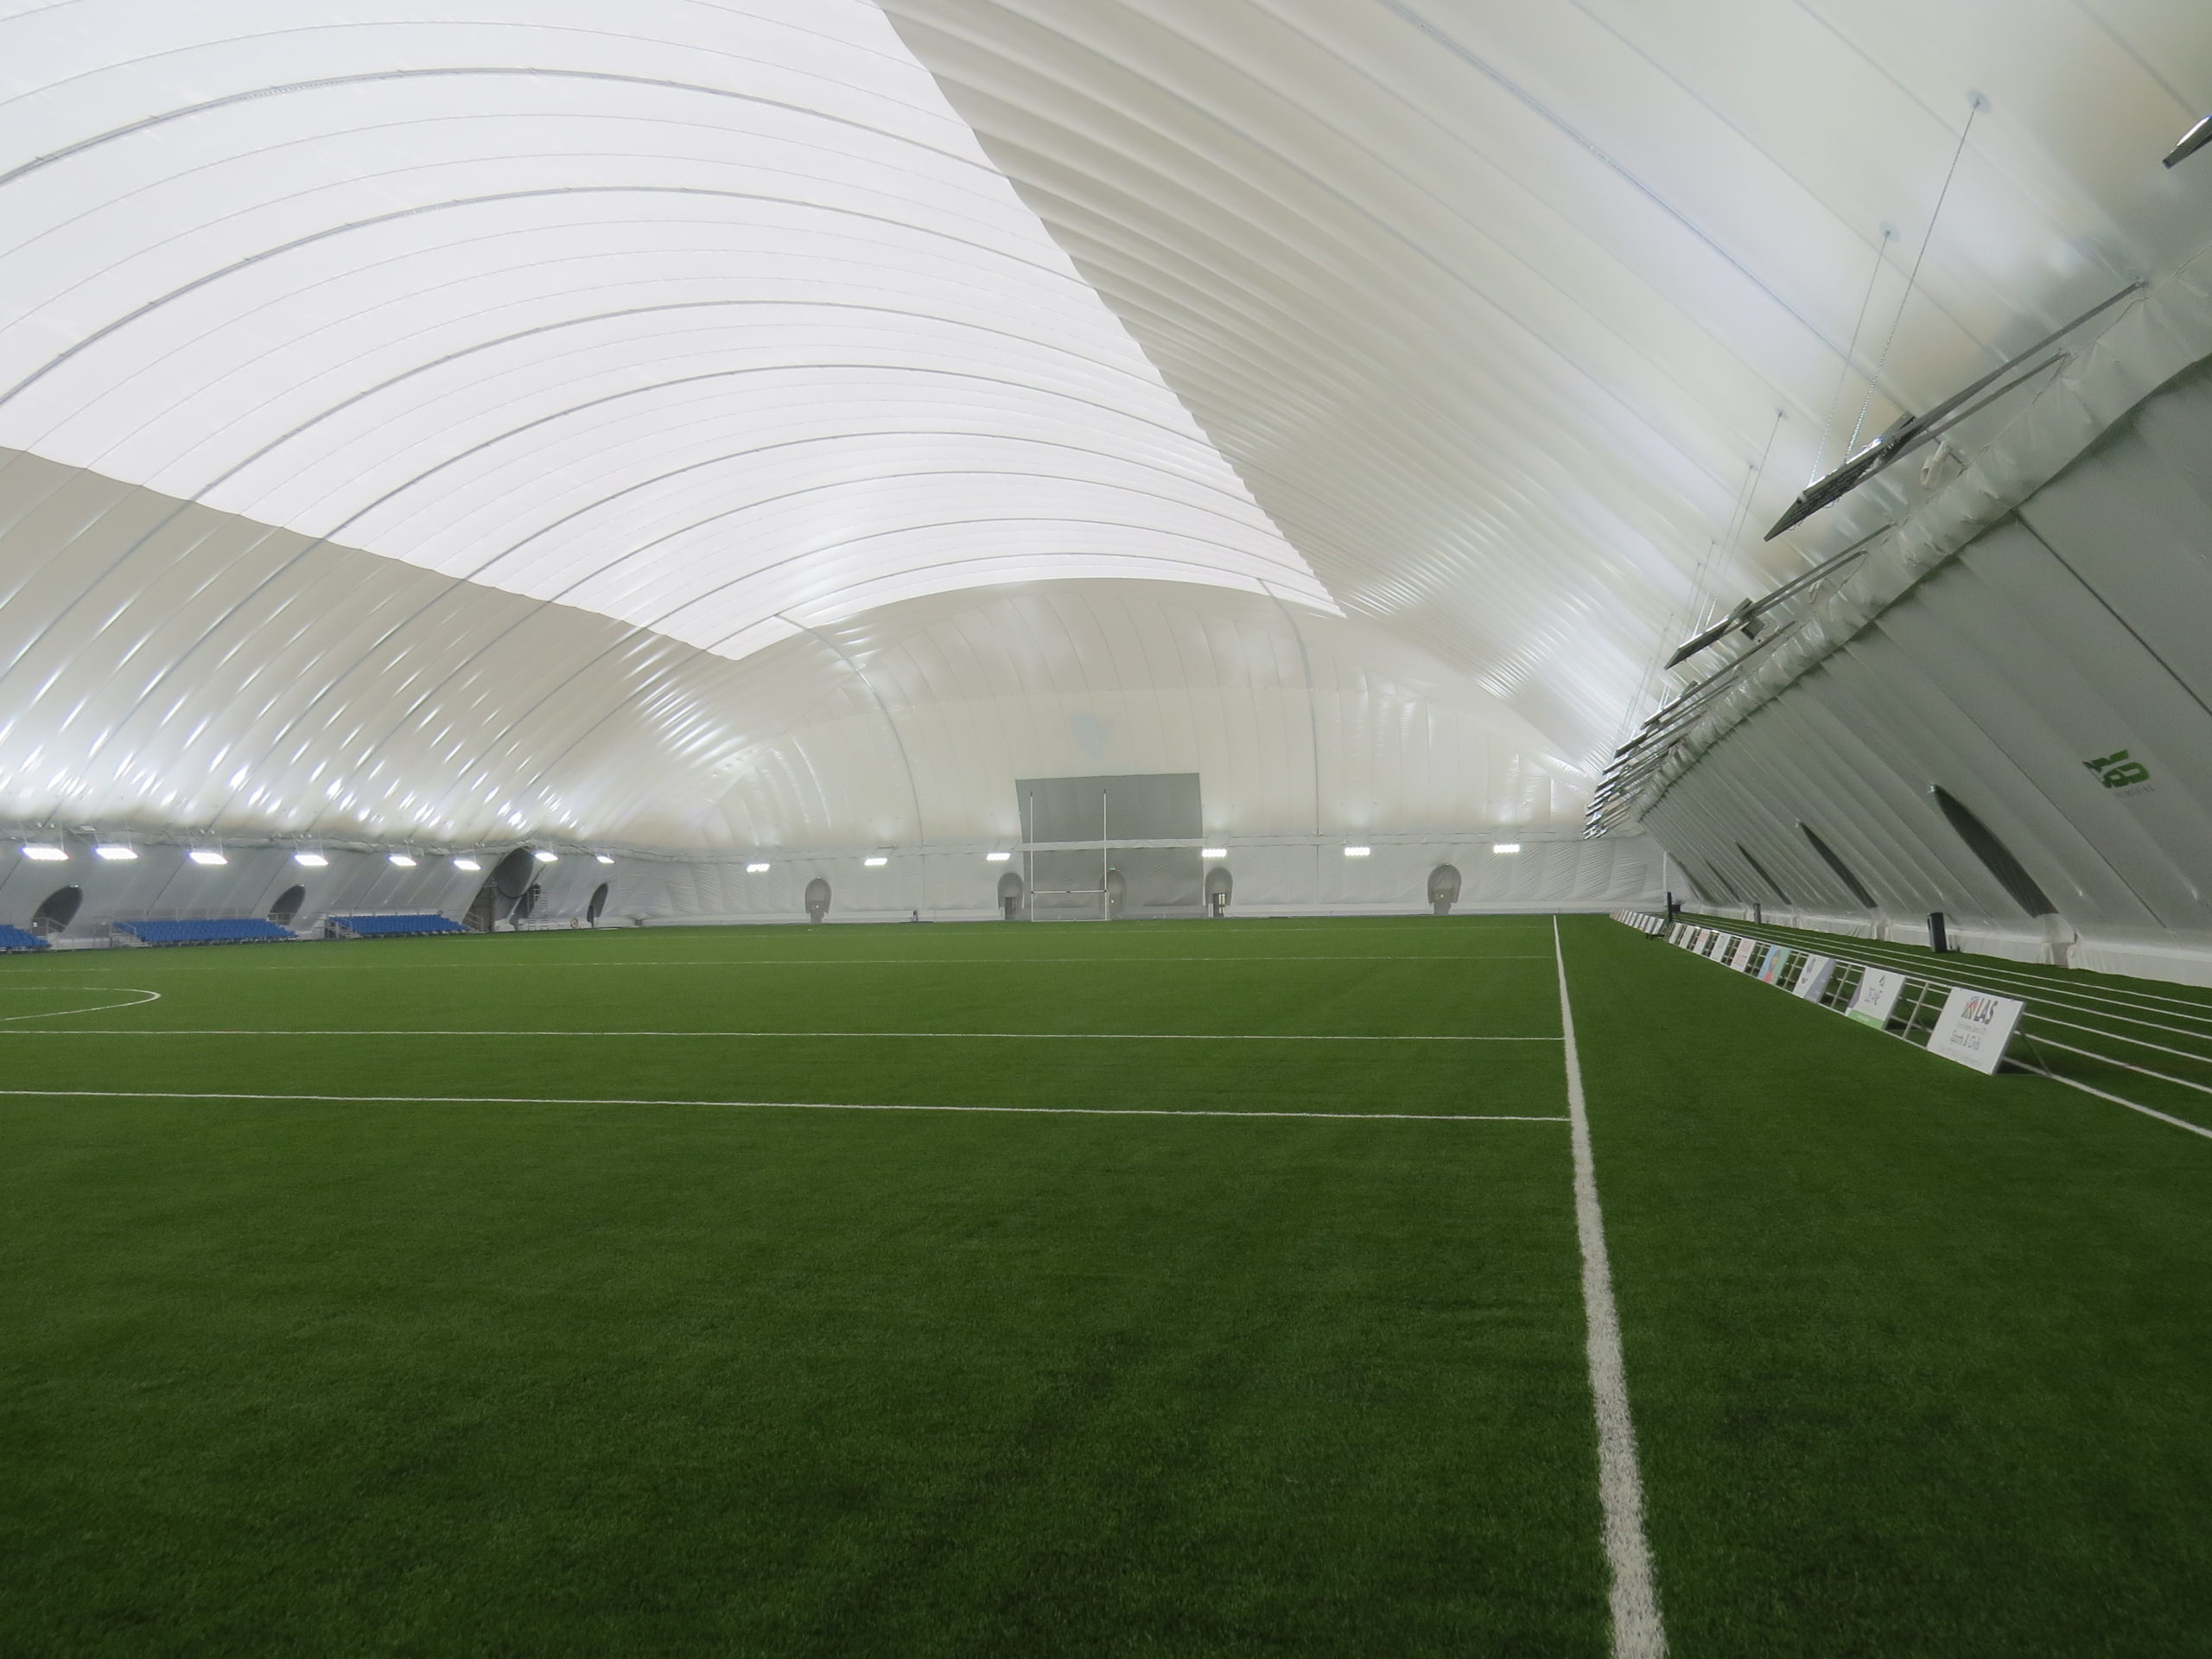 2022 Annual Congress to Take Place at NUI Galway Connacht GAA Air Dome This Weekend